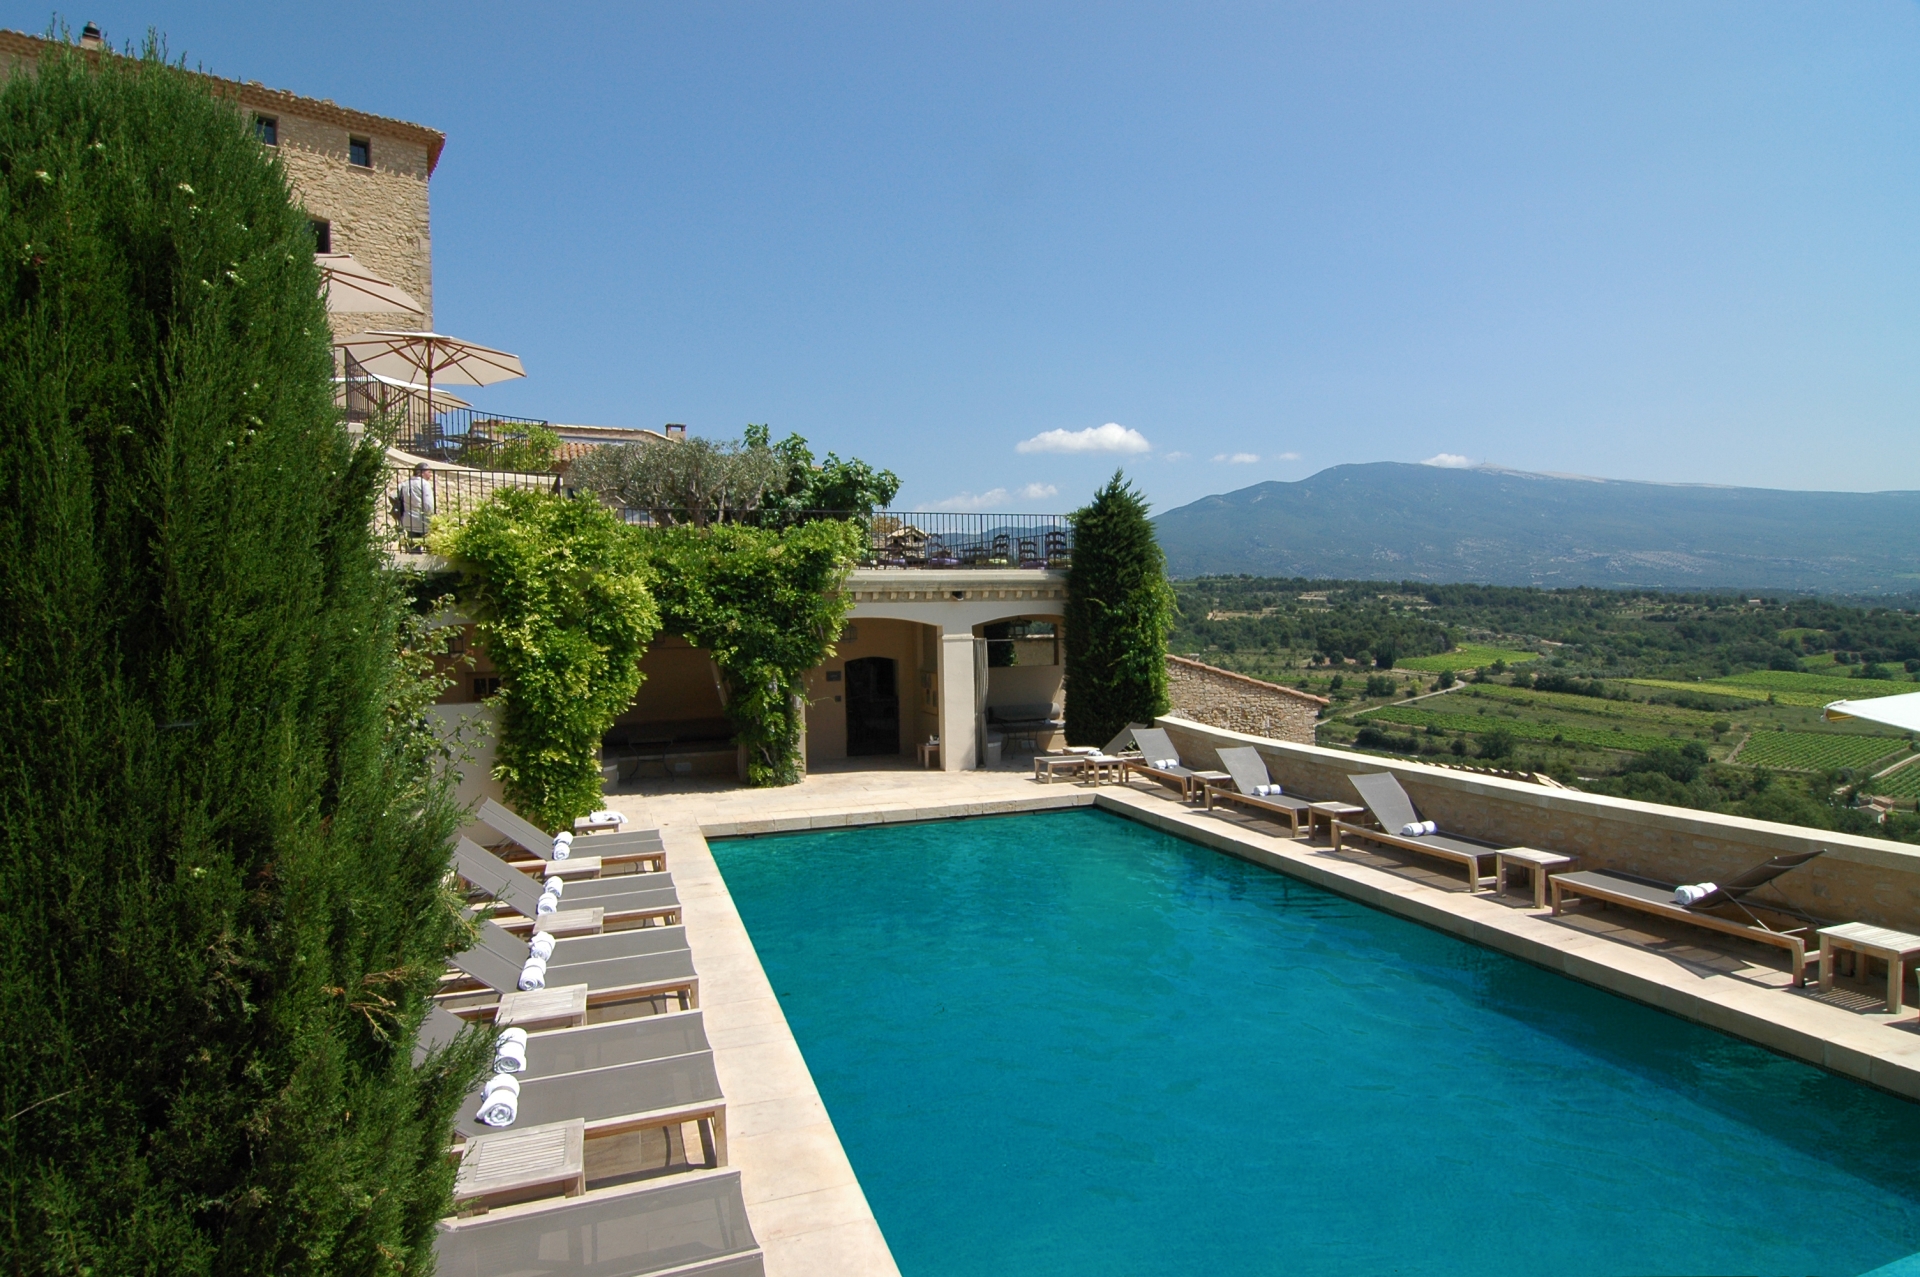 Pool view - The South of France in style